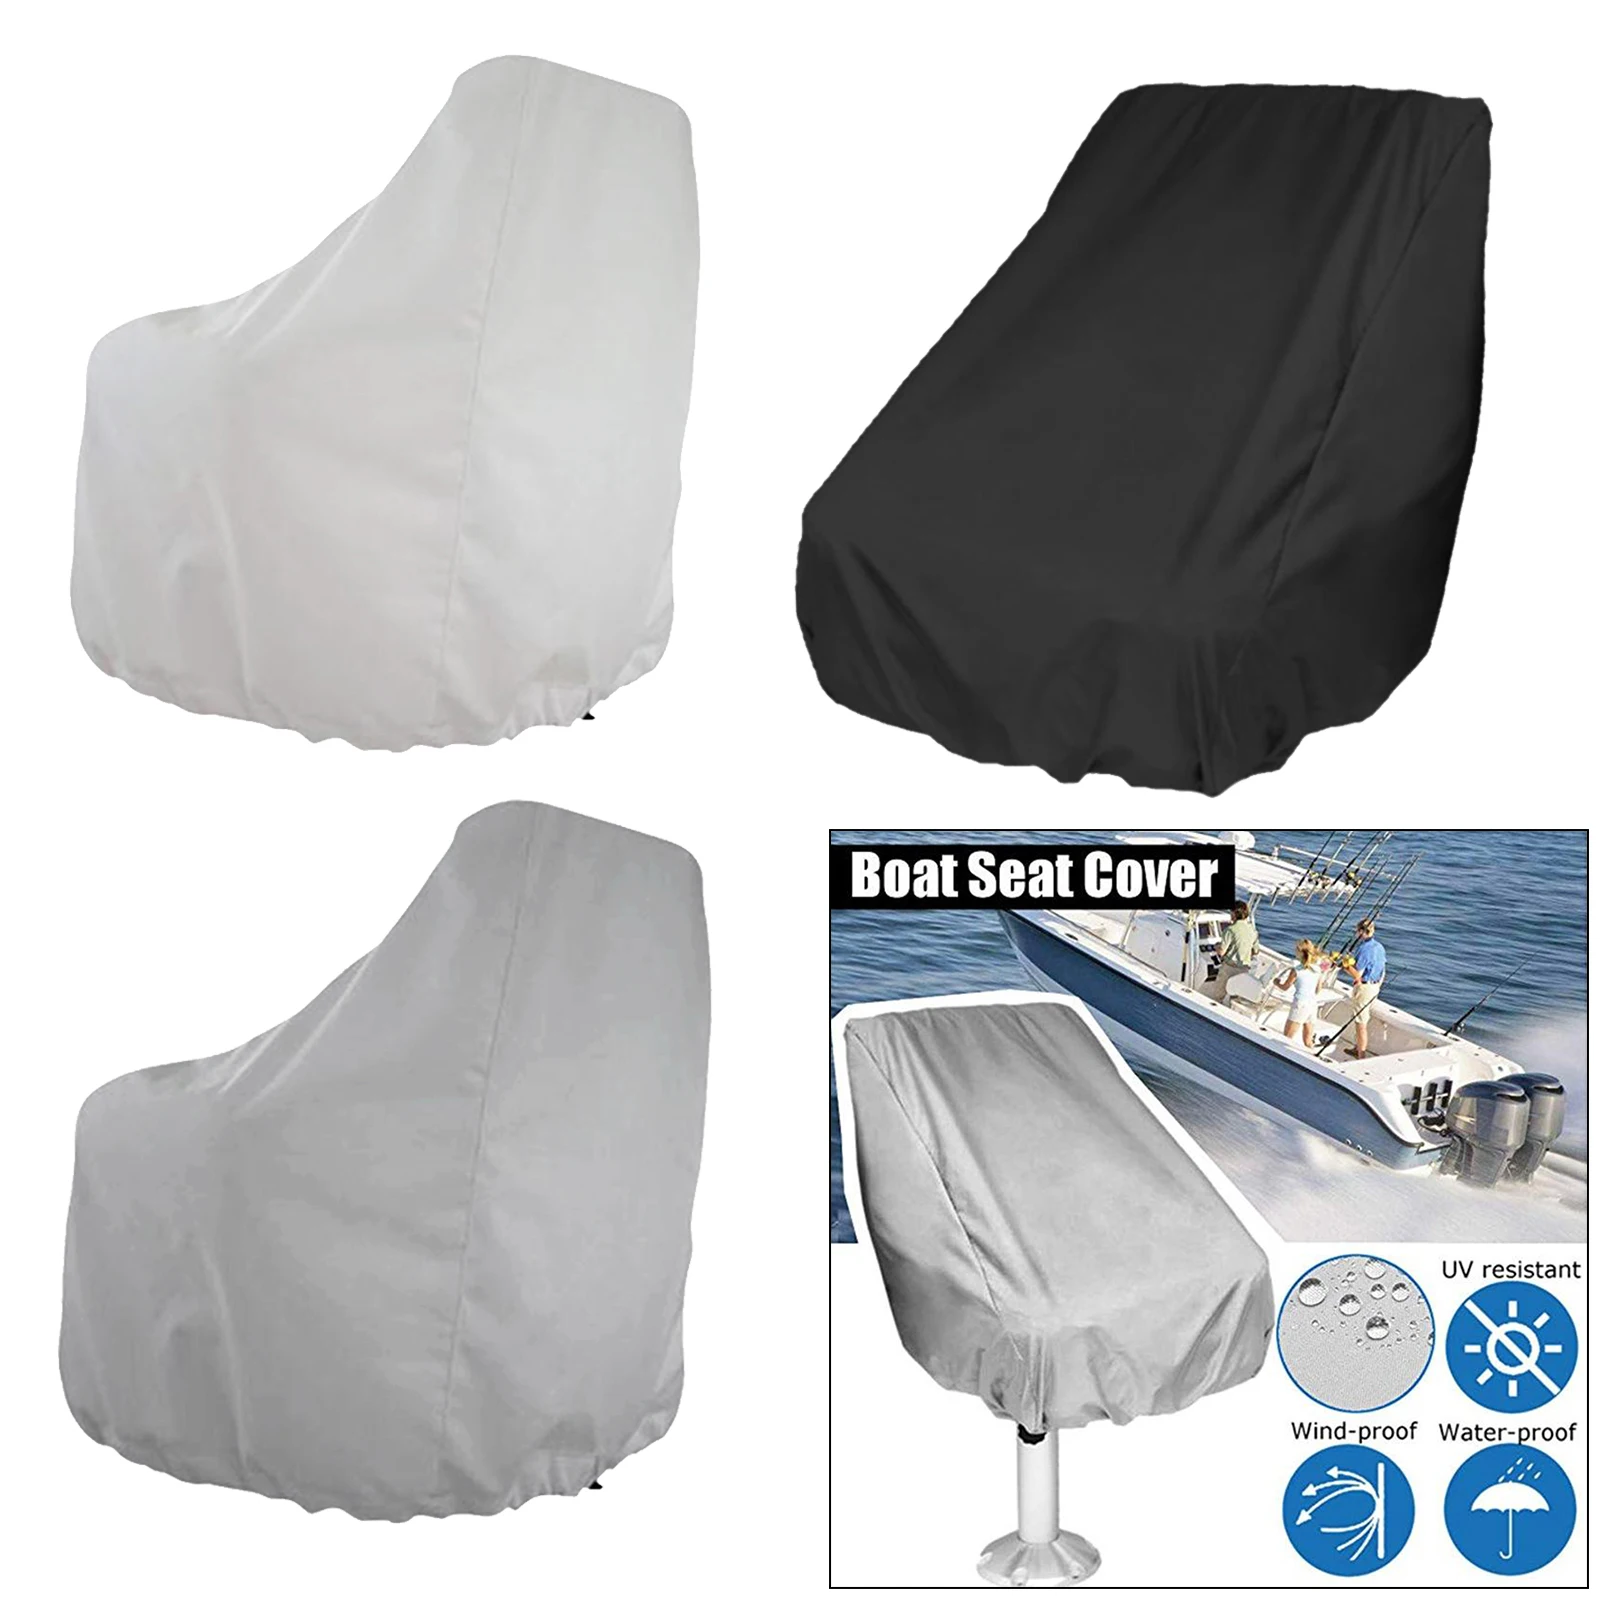 Boat Seat Cover, Folding Waterproof Heavy-Duty Weather Resistant Fabric Protects Fishing Captains Chair